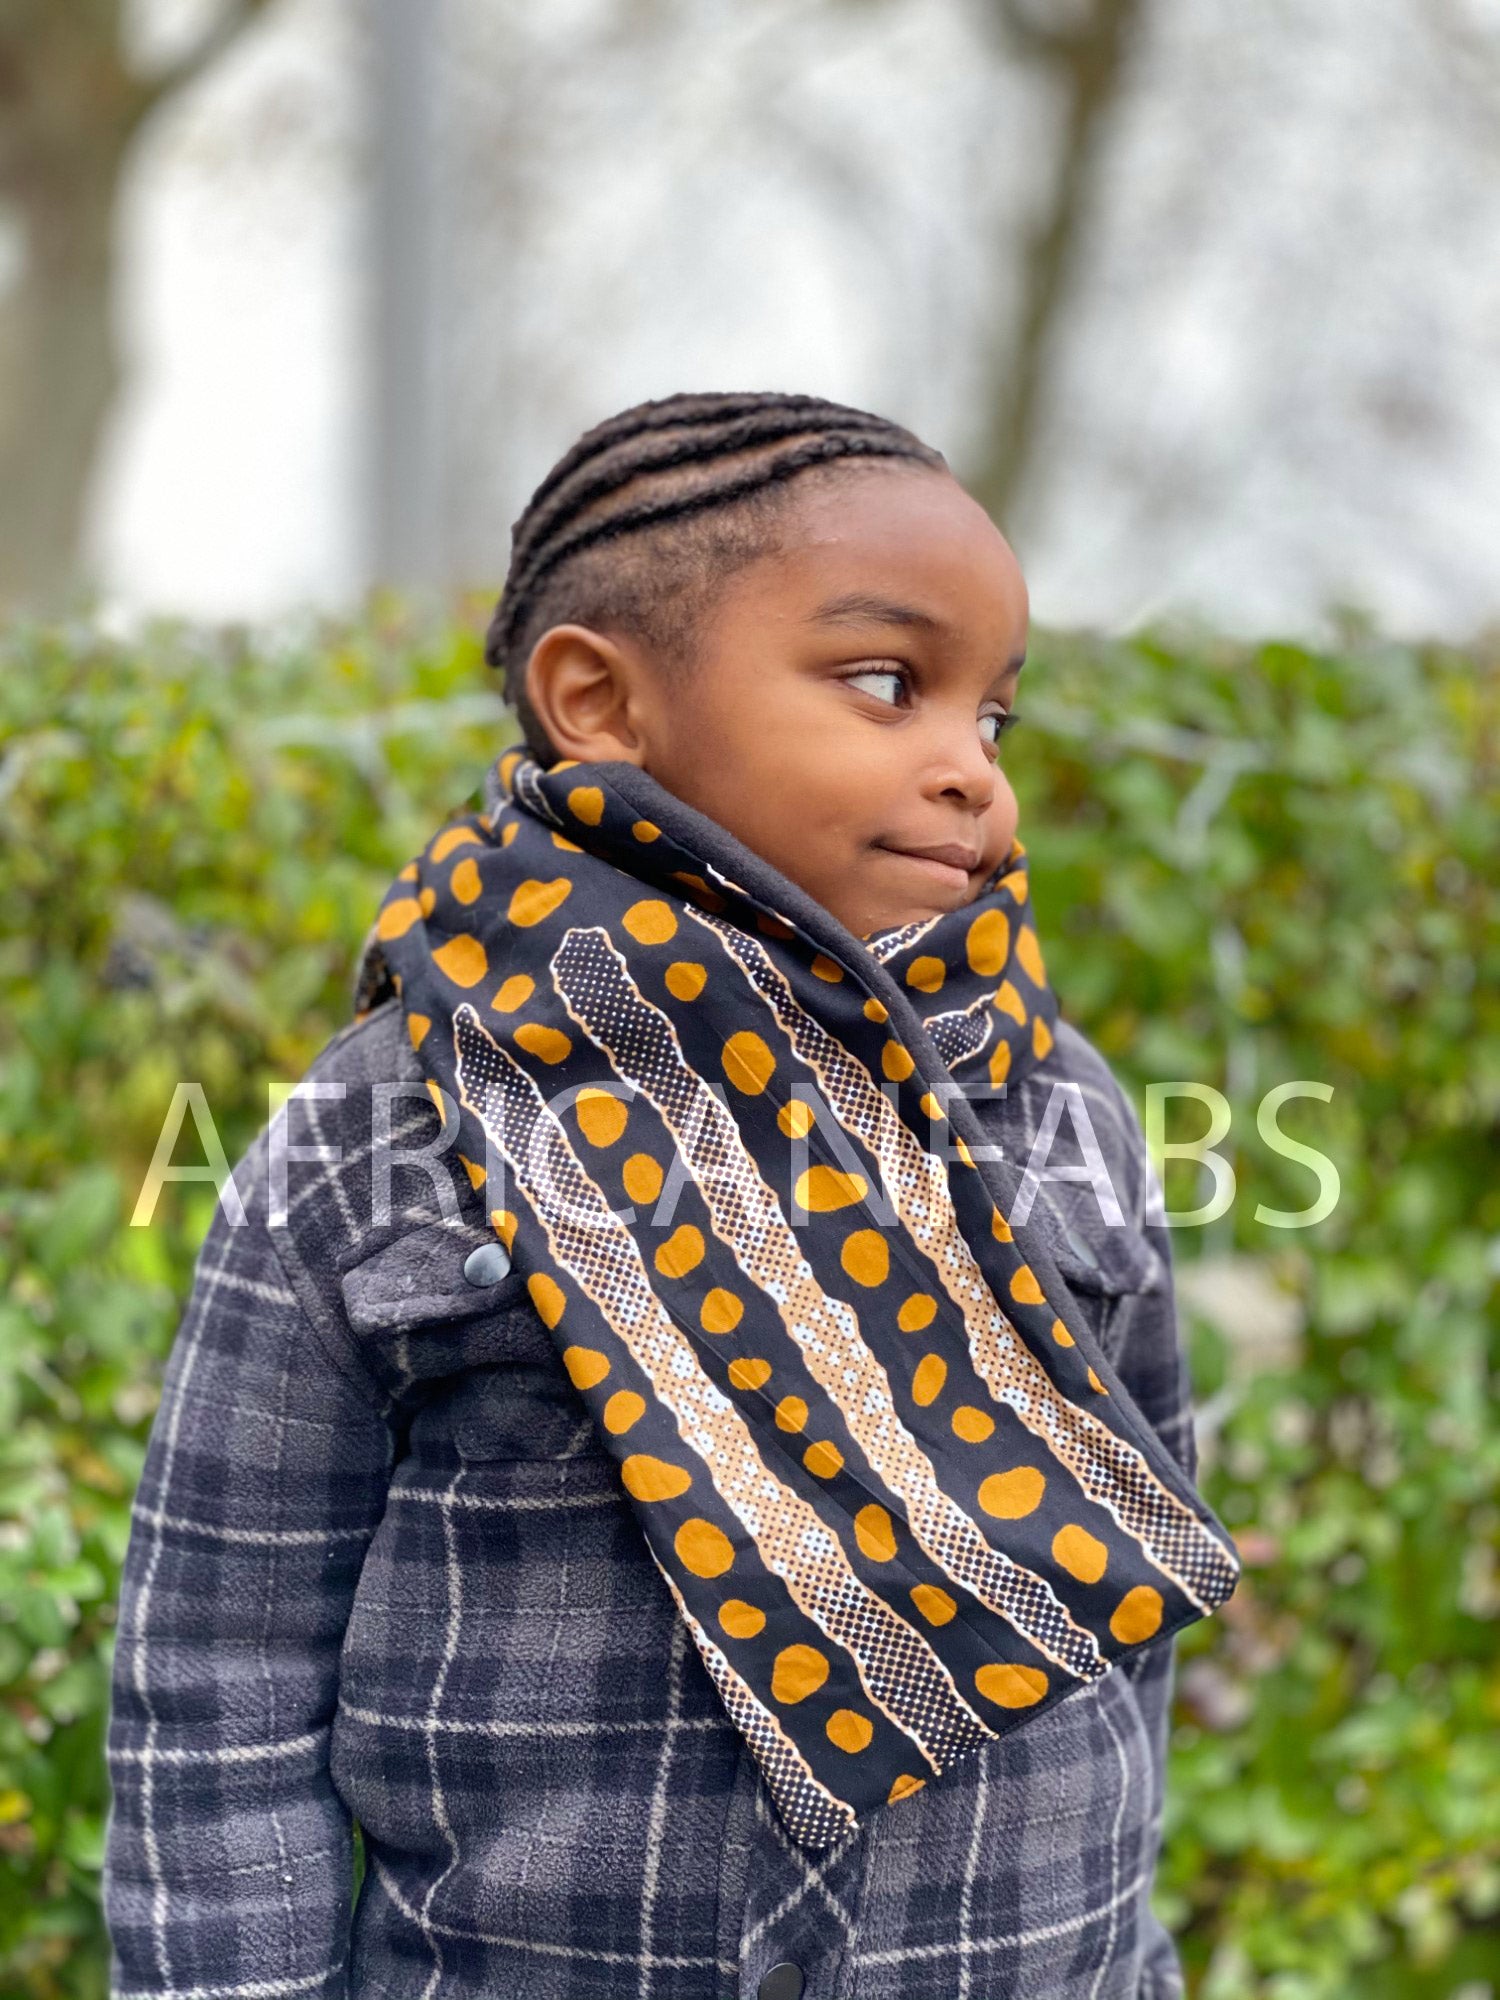 Kente Cloth African Patterned Scarf